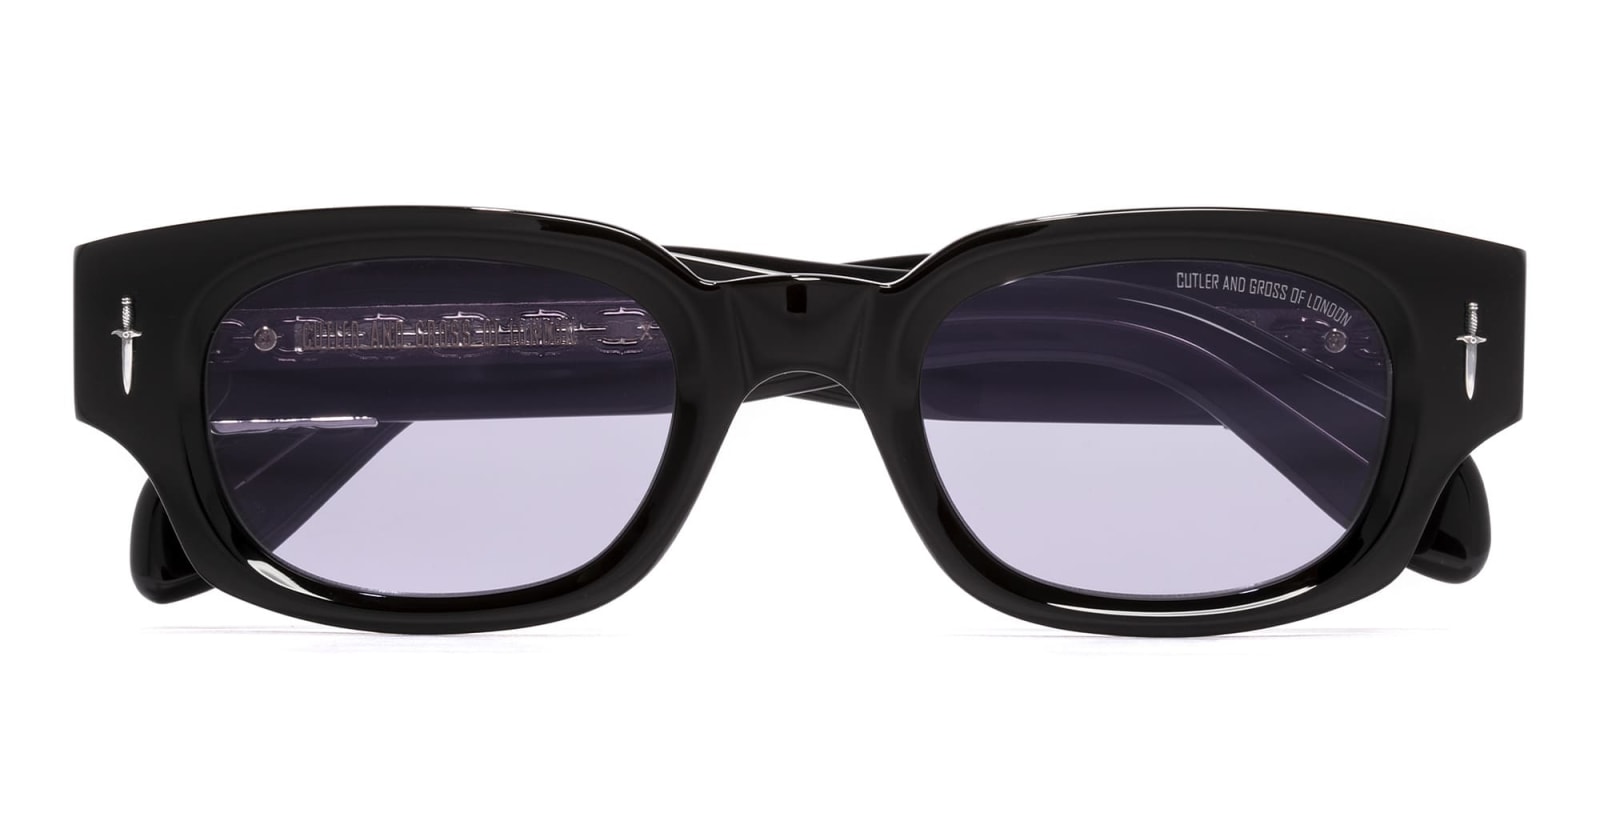 Shop Cutler And Gross The Great Frog - Soaring Eagle / Black Sunglasses